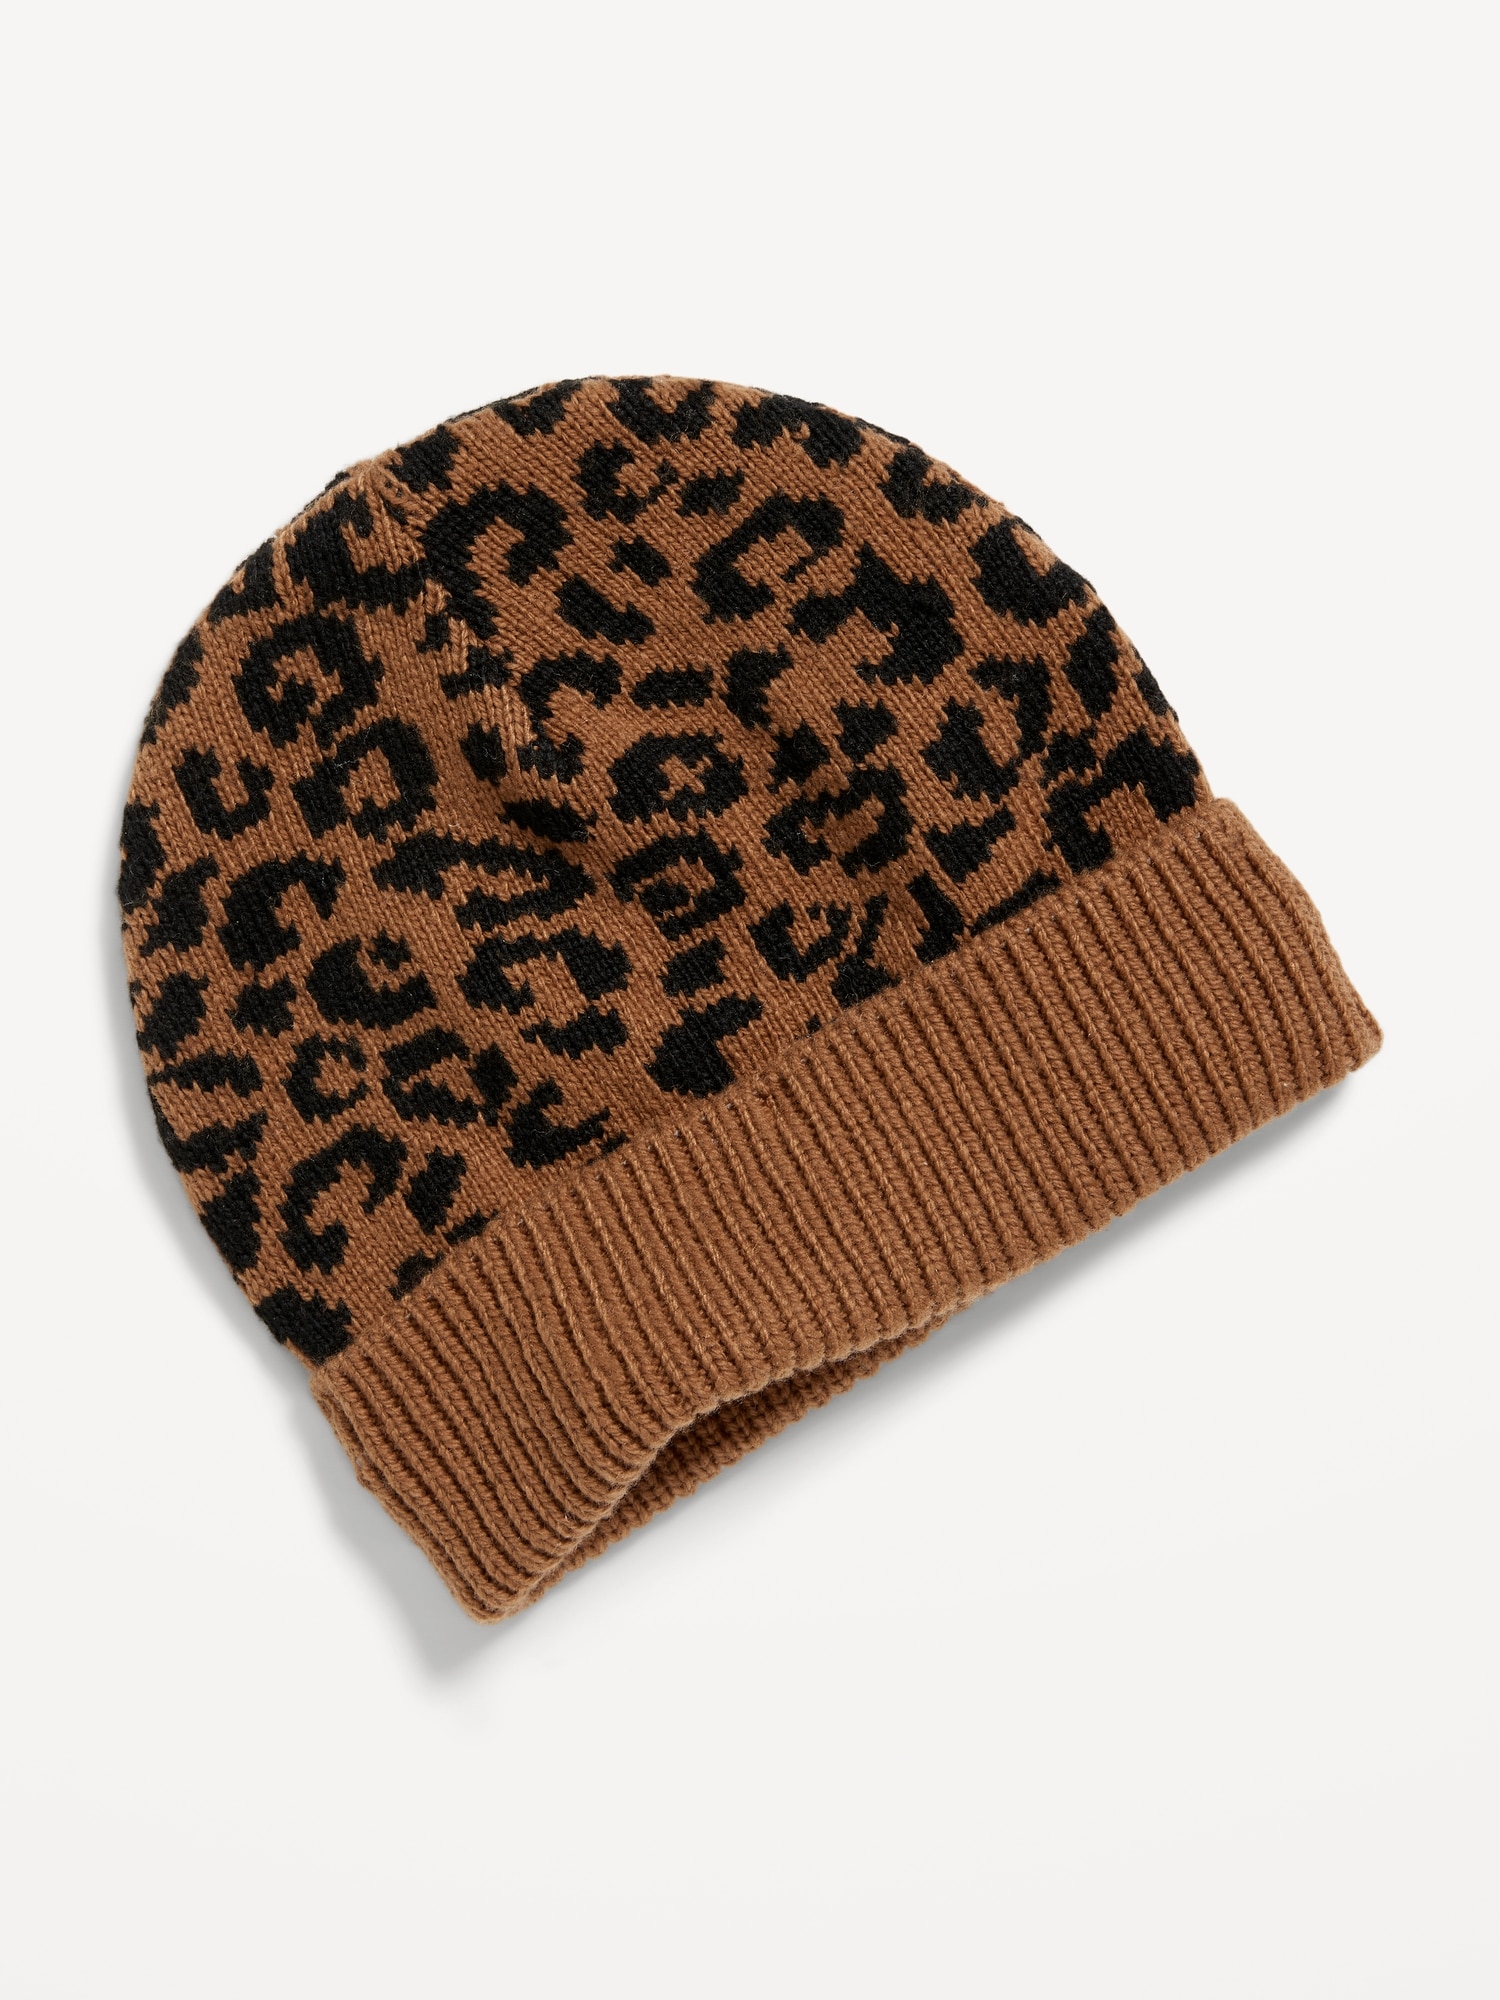 Printed Beanie for Toddler Girls